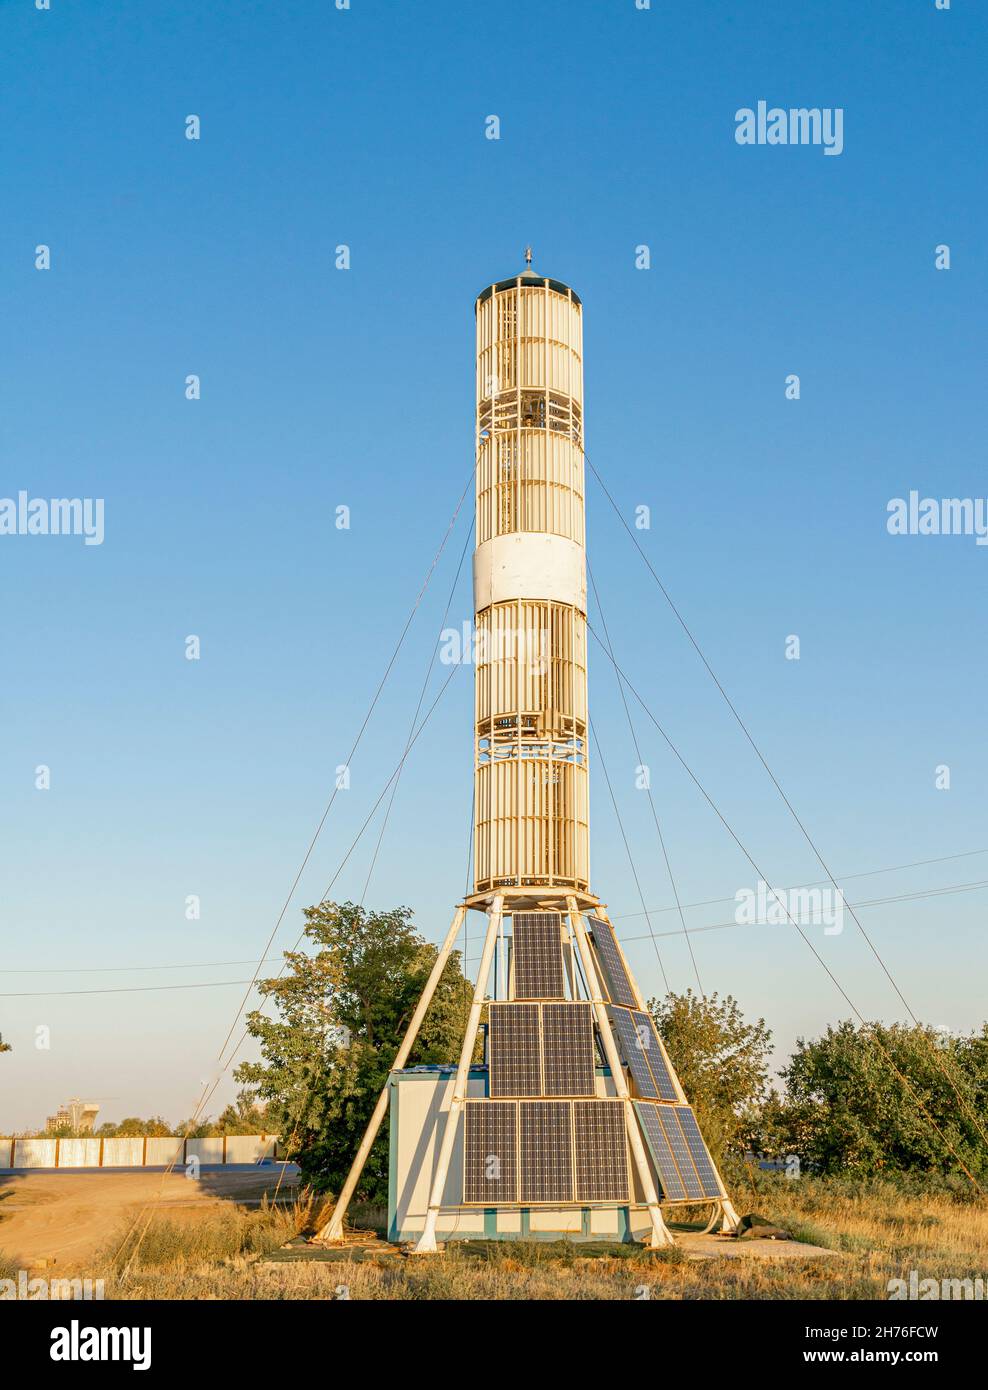 Solar battery batteries i nthe form of the rocket installed in Astana, Nur-Sultan, Kazakhstan, Central Asia Stock Photo